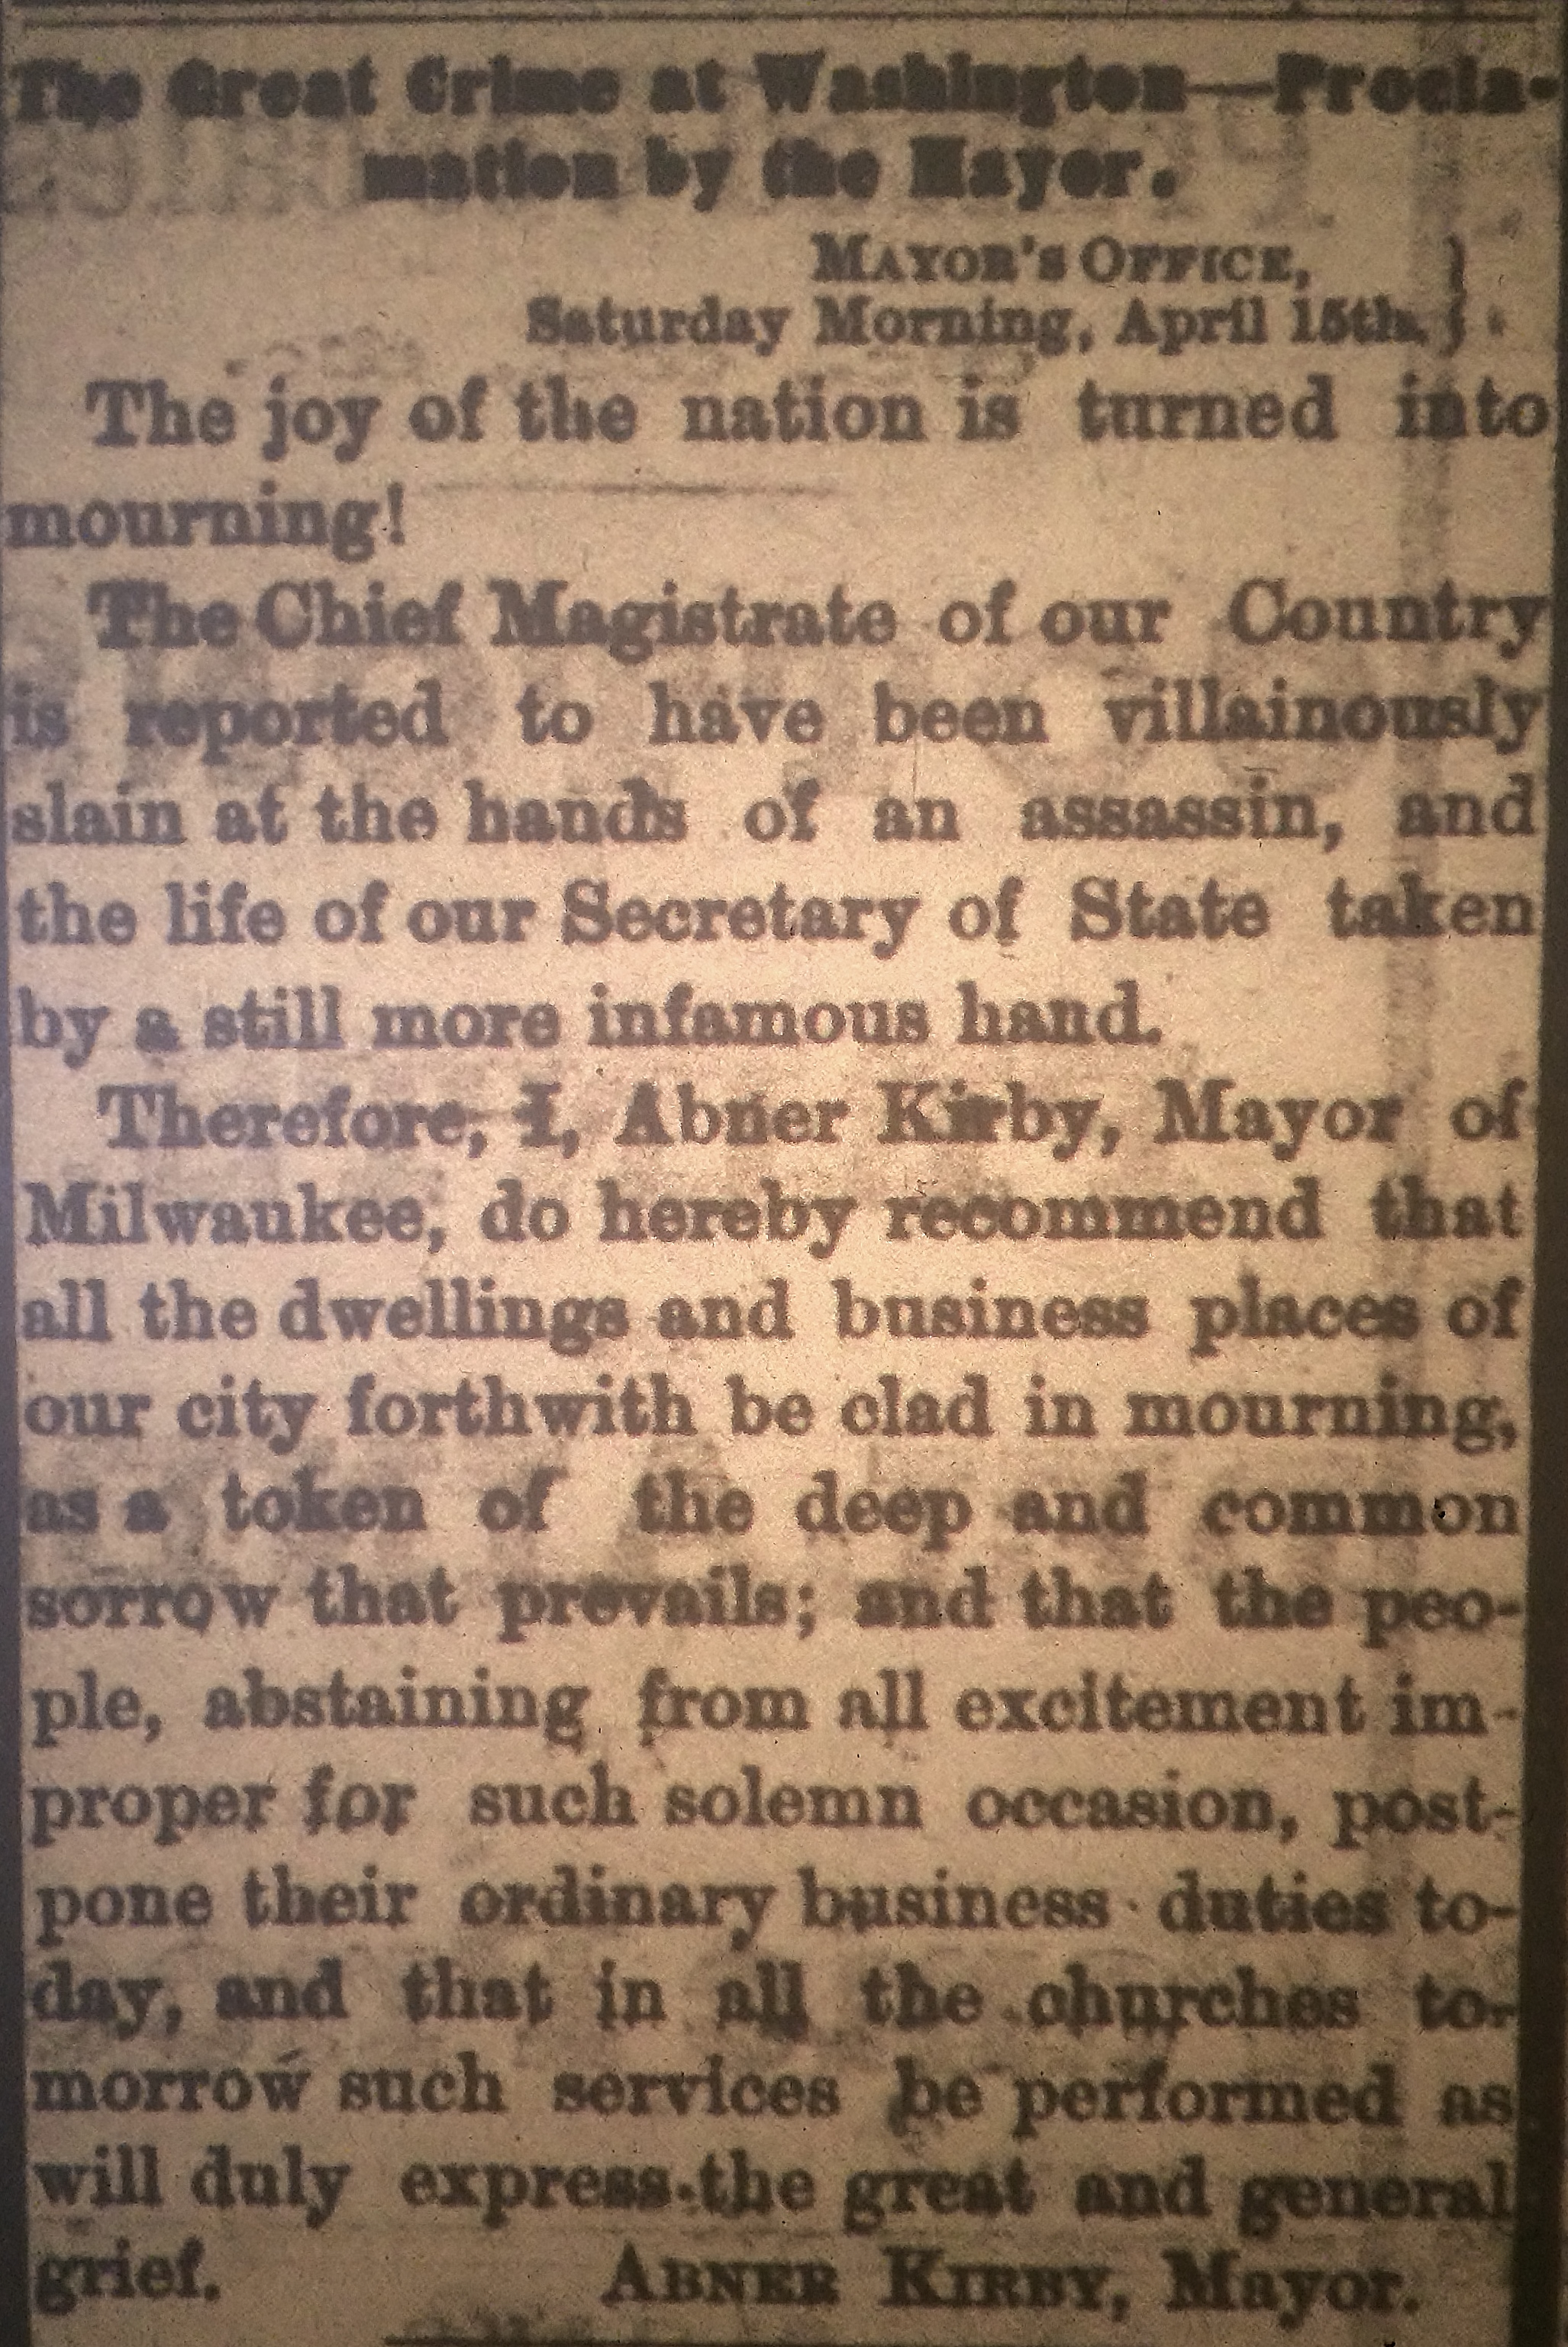 “The Great Crime in Washington- Proclamation by the Mayor”